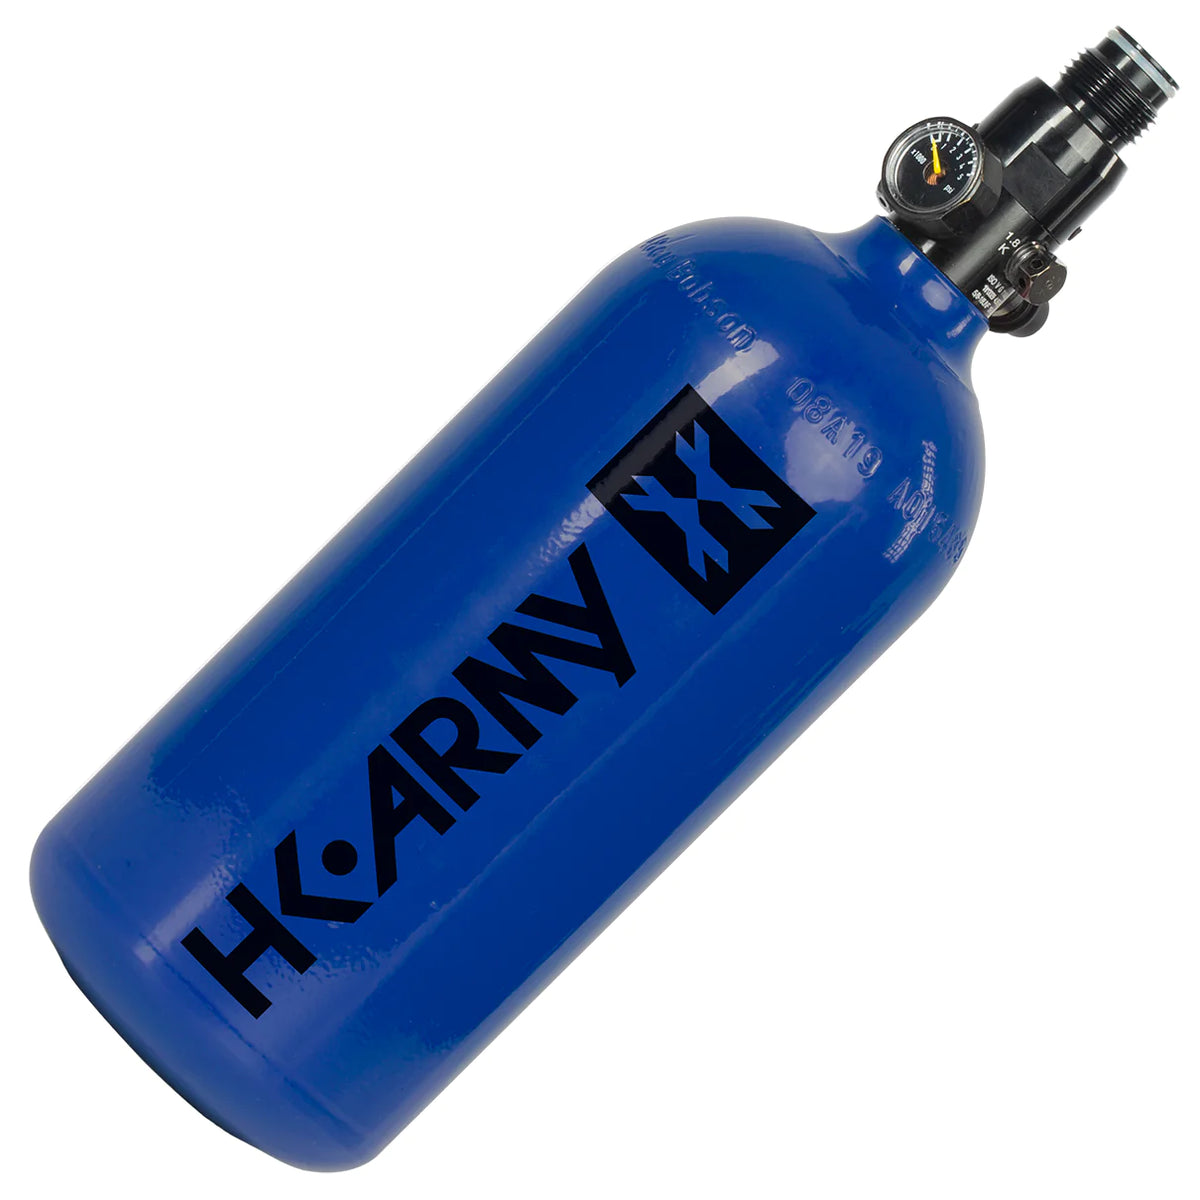 48ci / 3000psi -  Paintball Compressed Air Tank - Blue | HK Army